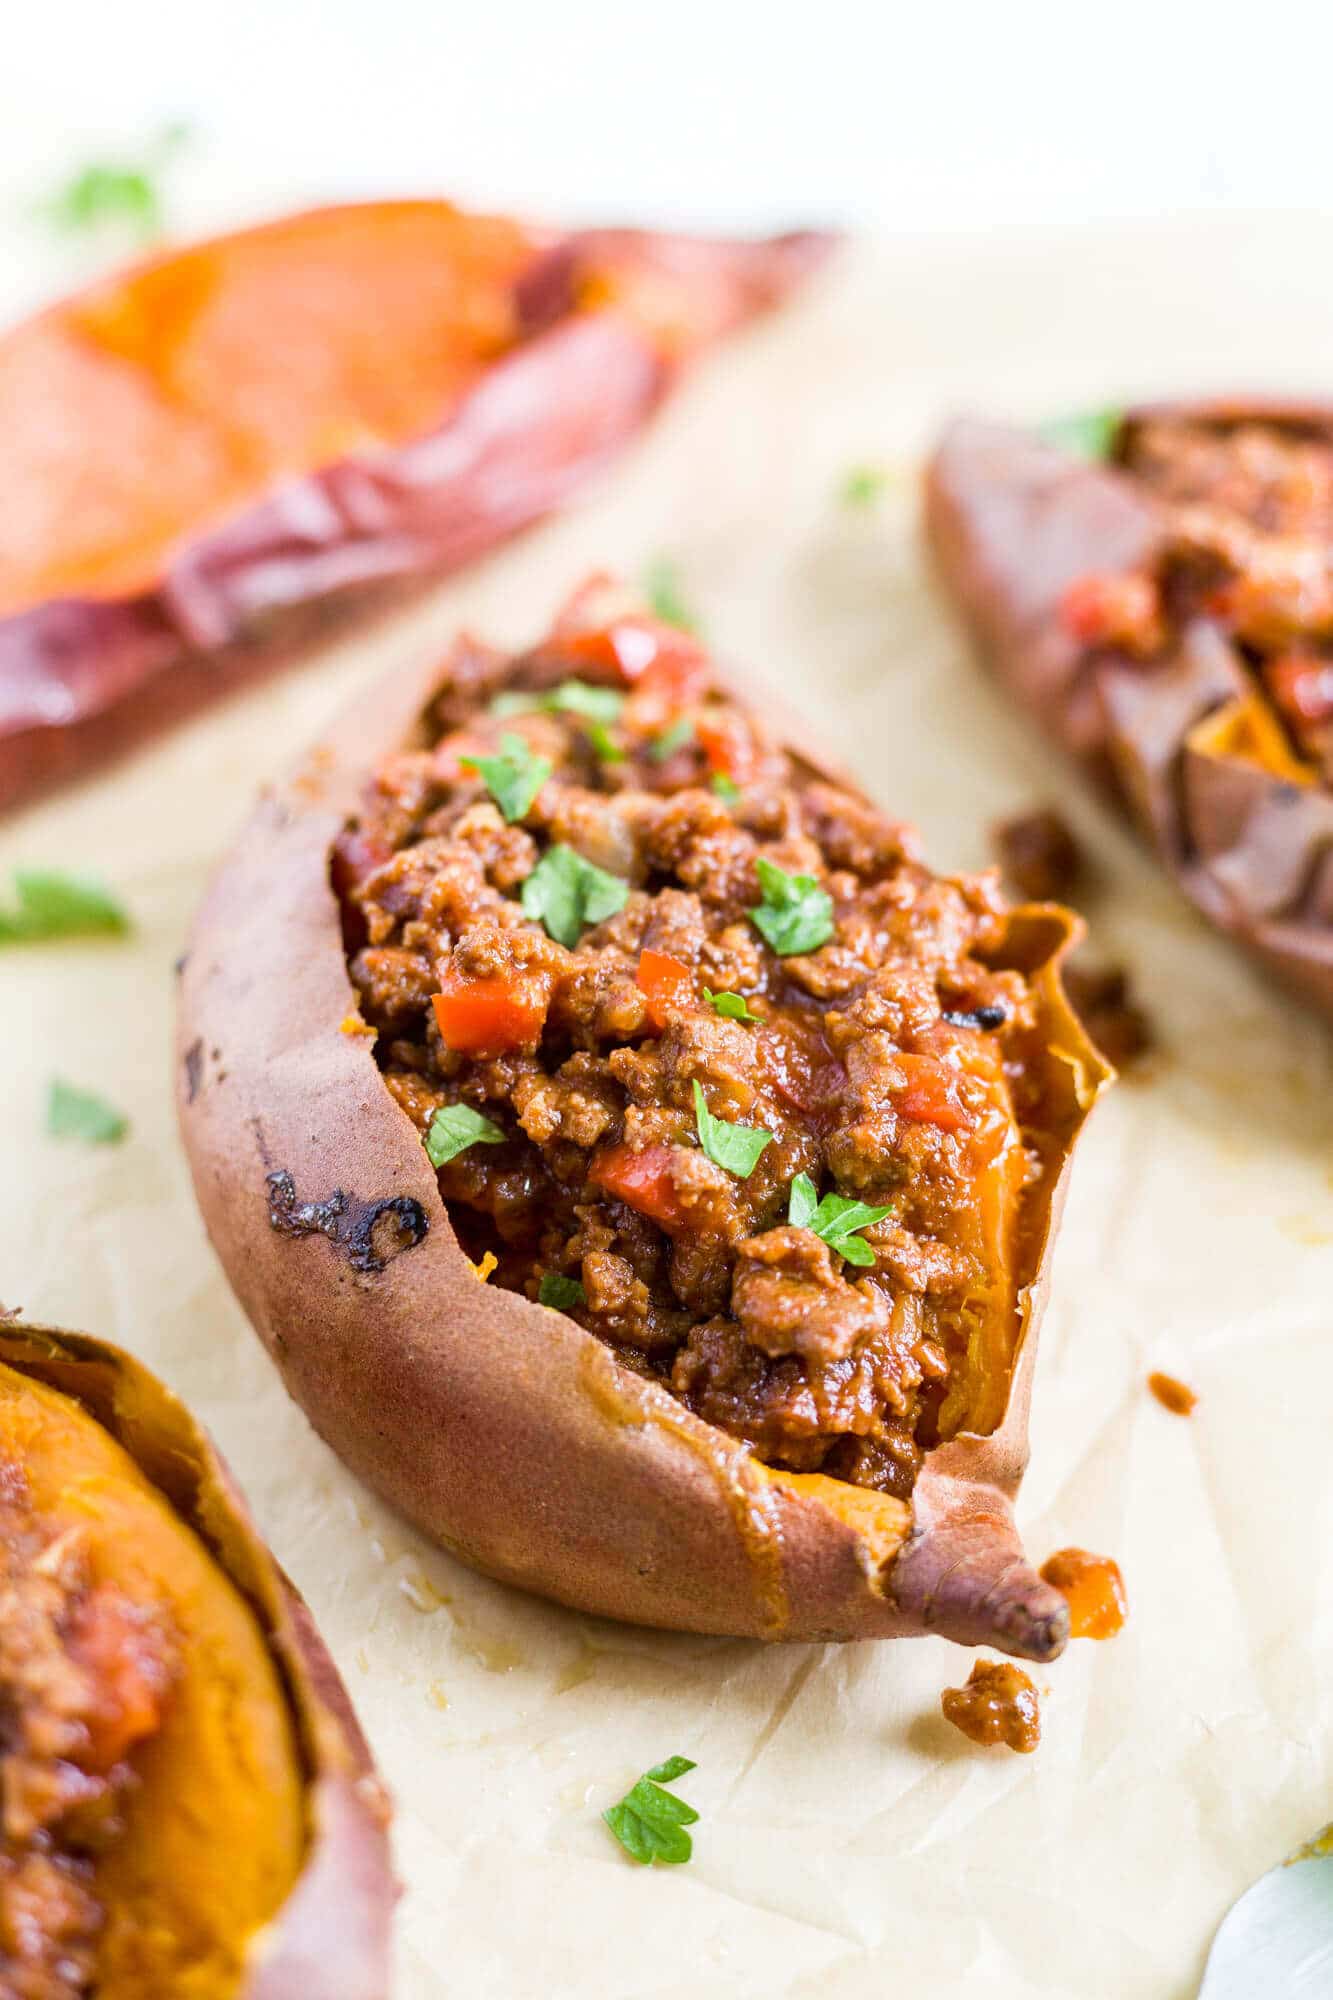 slow cooker healthy sloppy joes stuffed inside a sweet potato topped with parsley